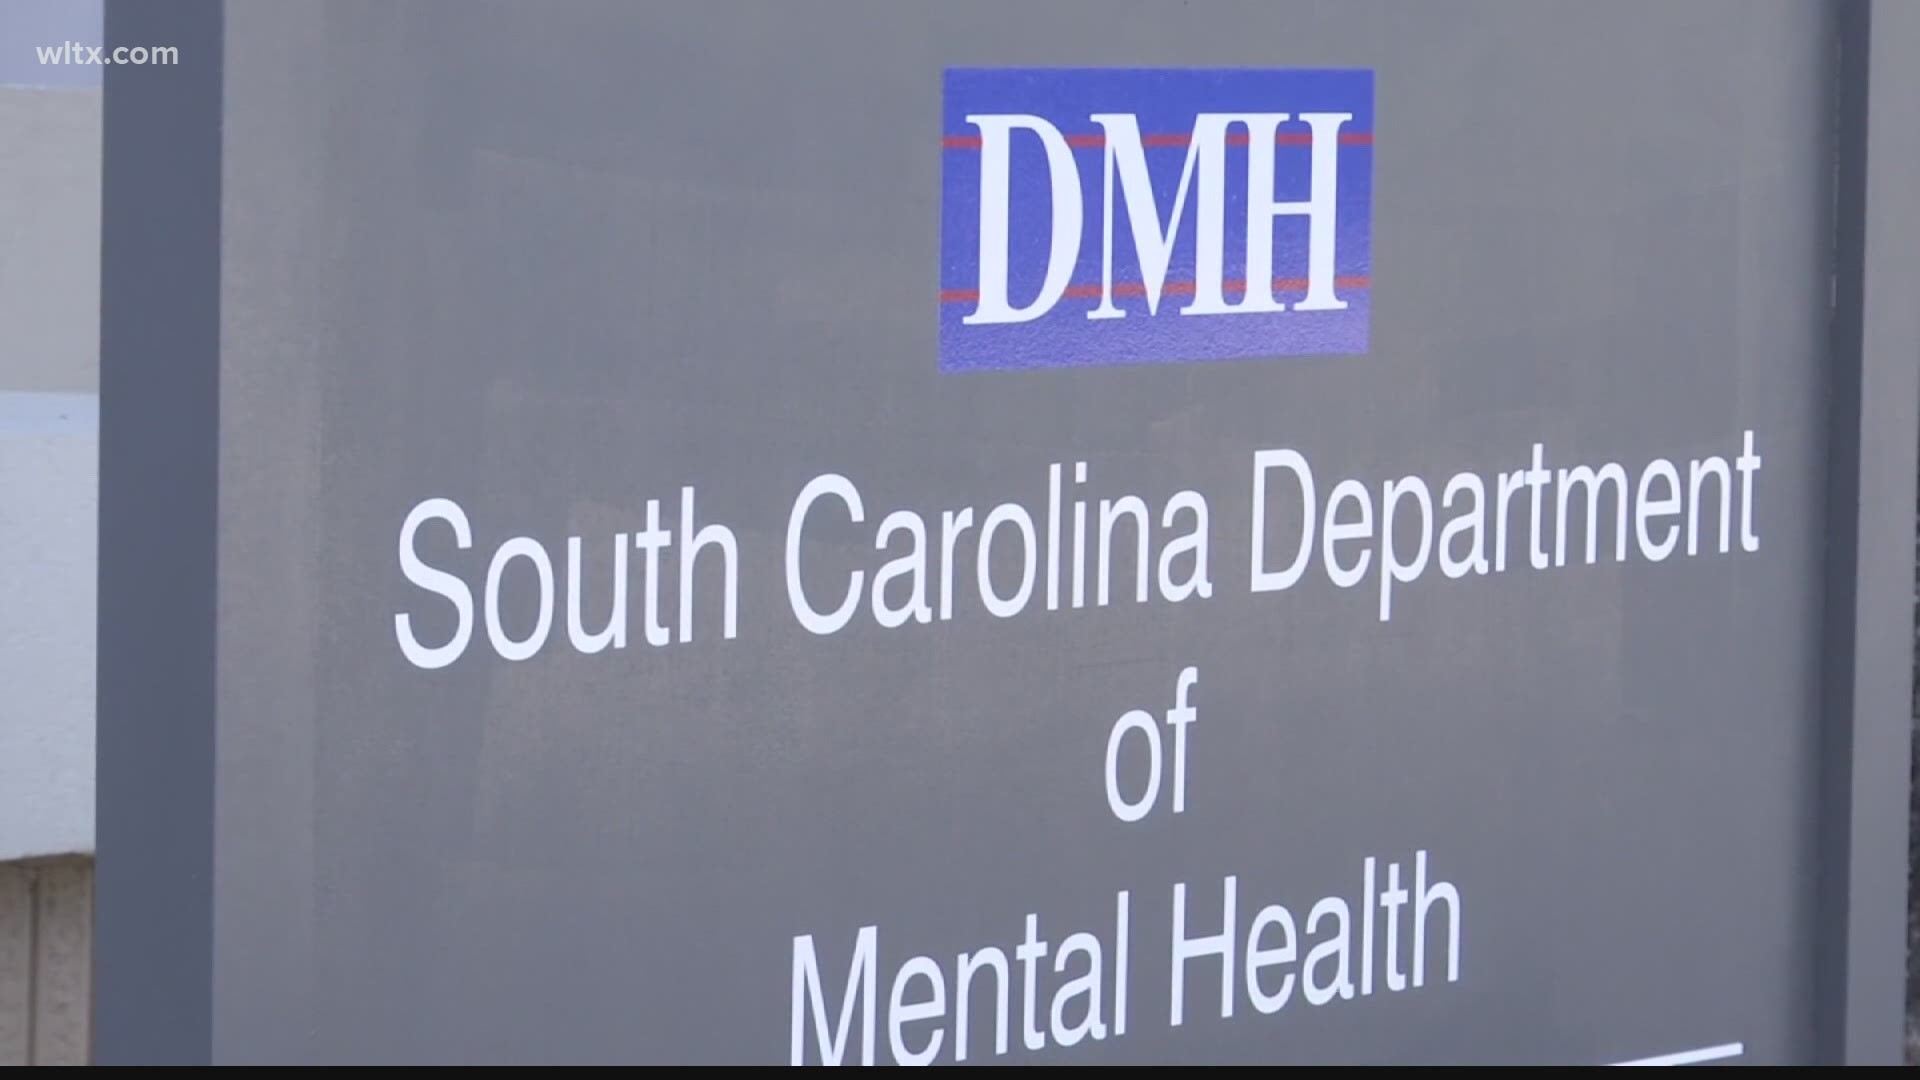 The Richland County Sheriff's Department and the South Carolina Department of Mental Health have created a new partnership to help people in the community.